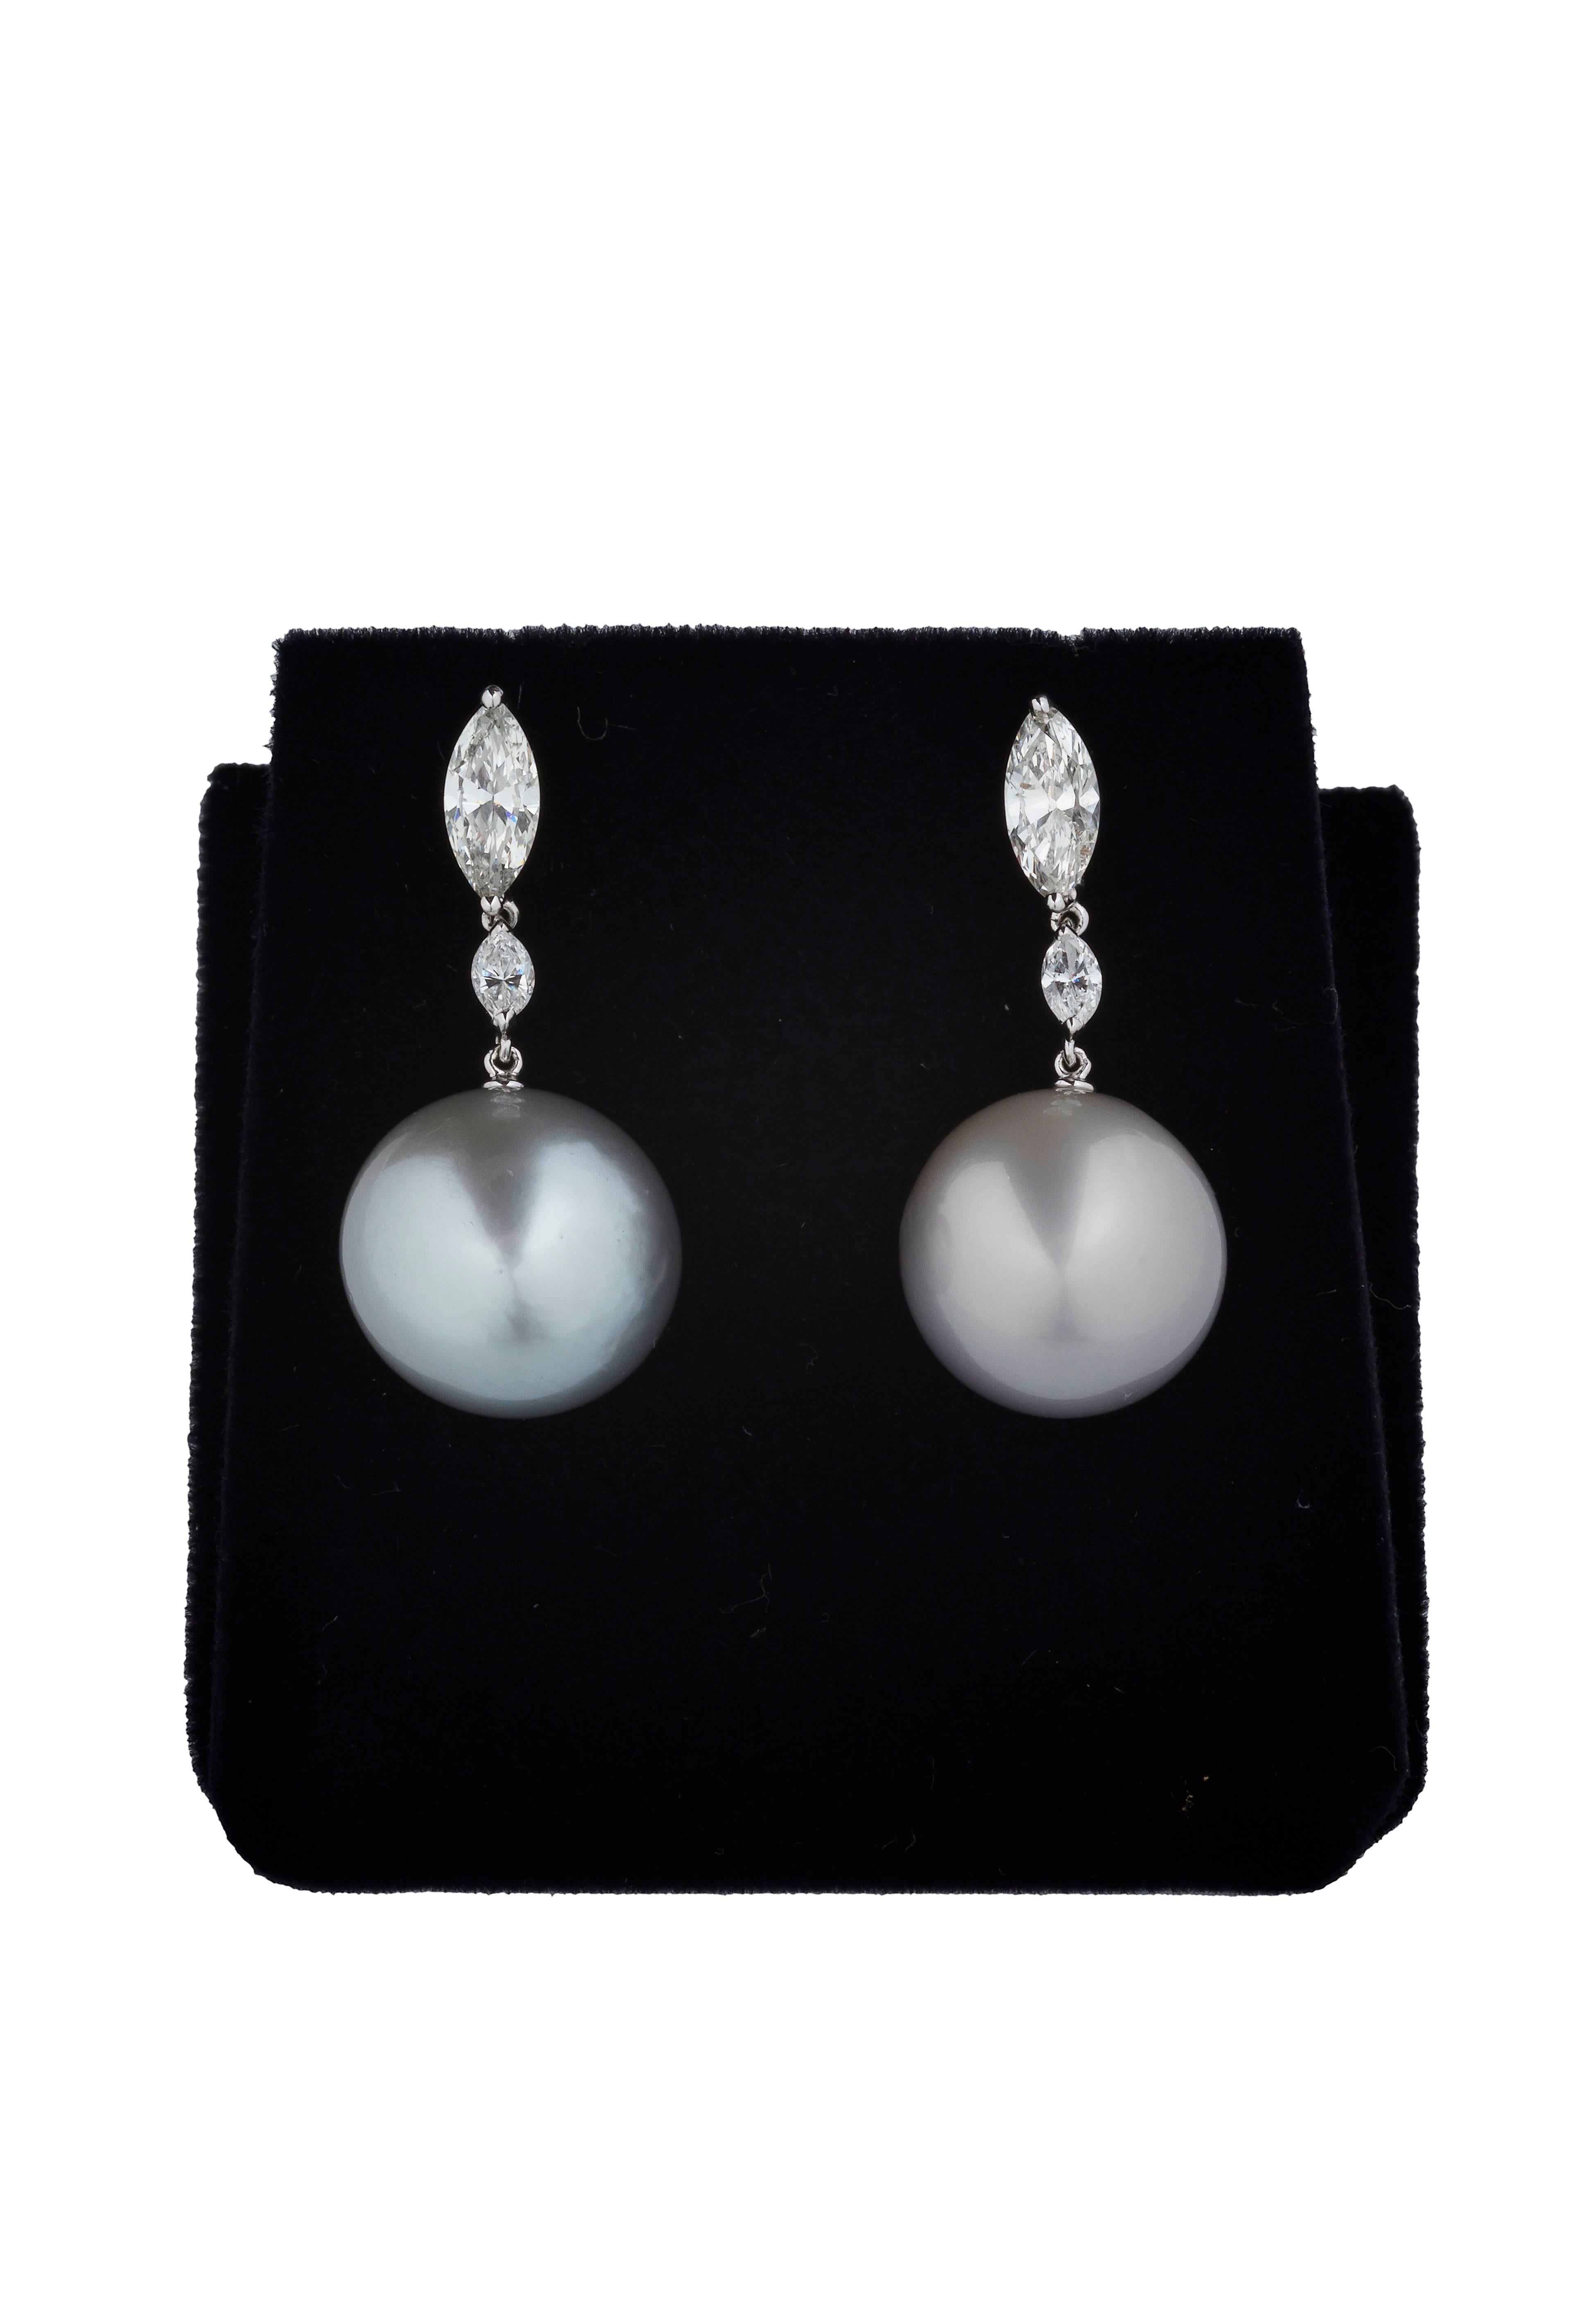 These exquisitely crafted earrings are classic and elegant and made of two drops of diamond mounted in 18k white gold supporting a single Australian pearl whose perfectly round shape and sophisticated shade make this piece a timeless accent in any